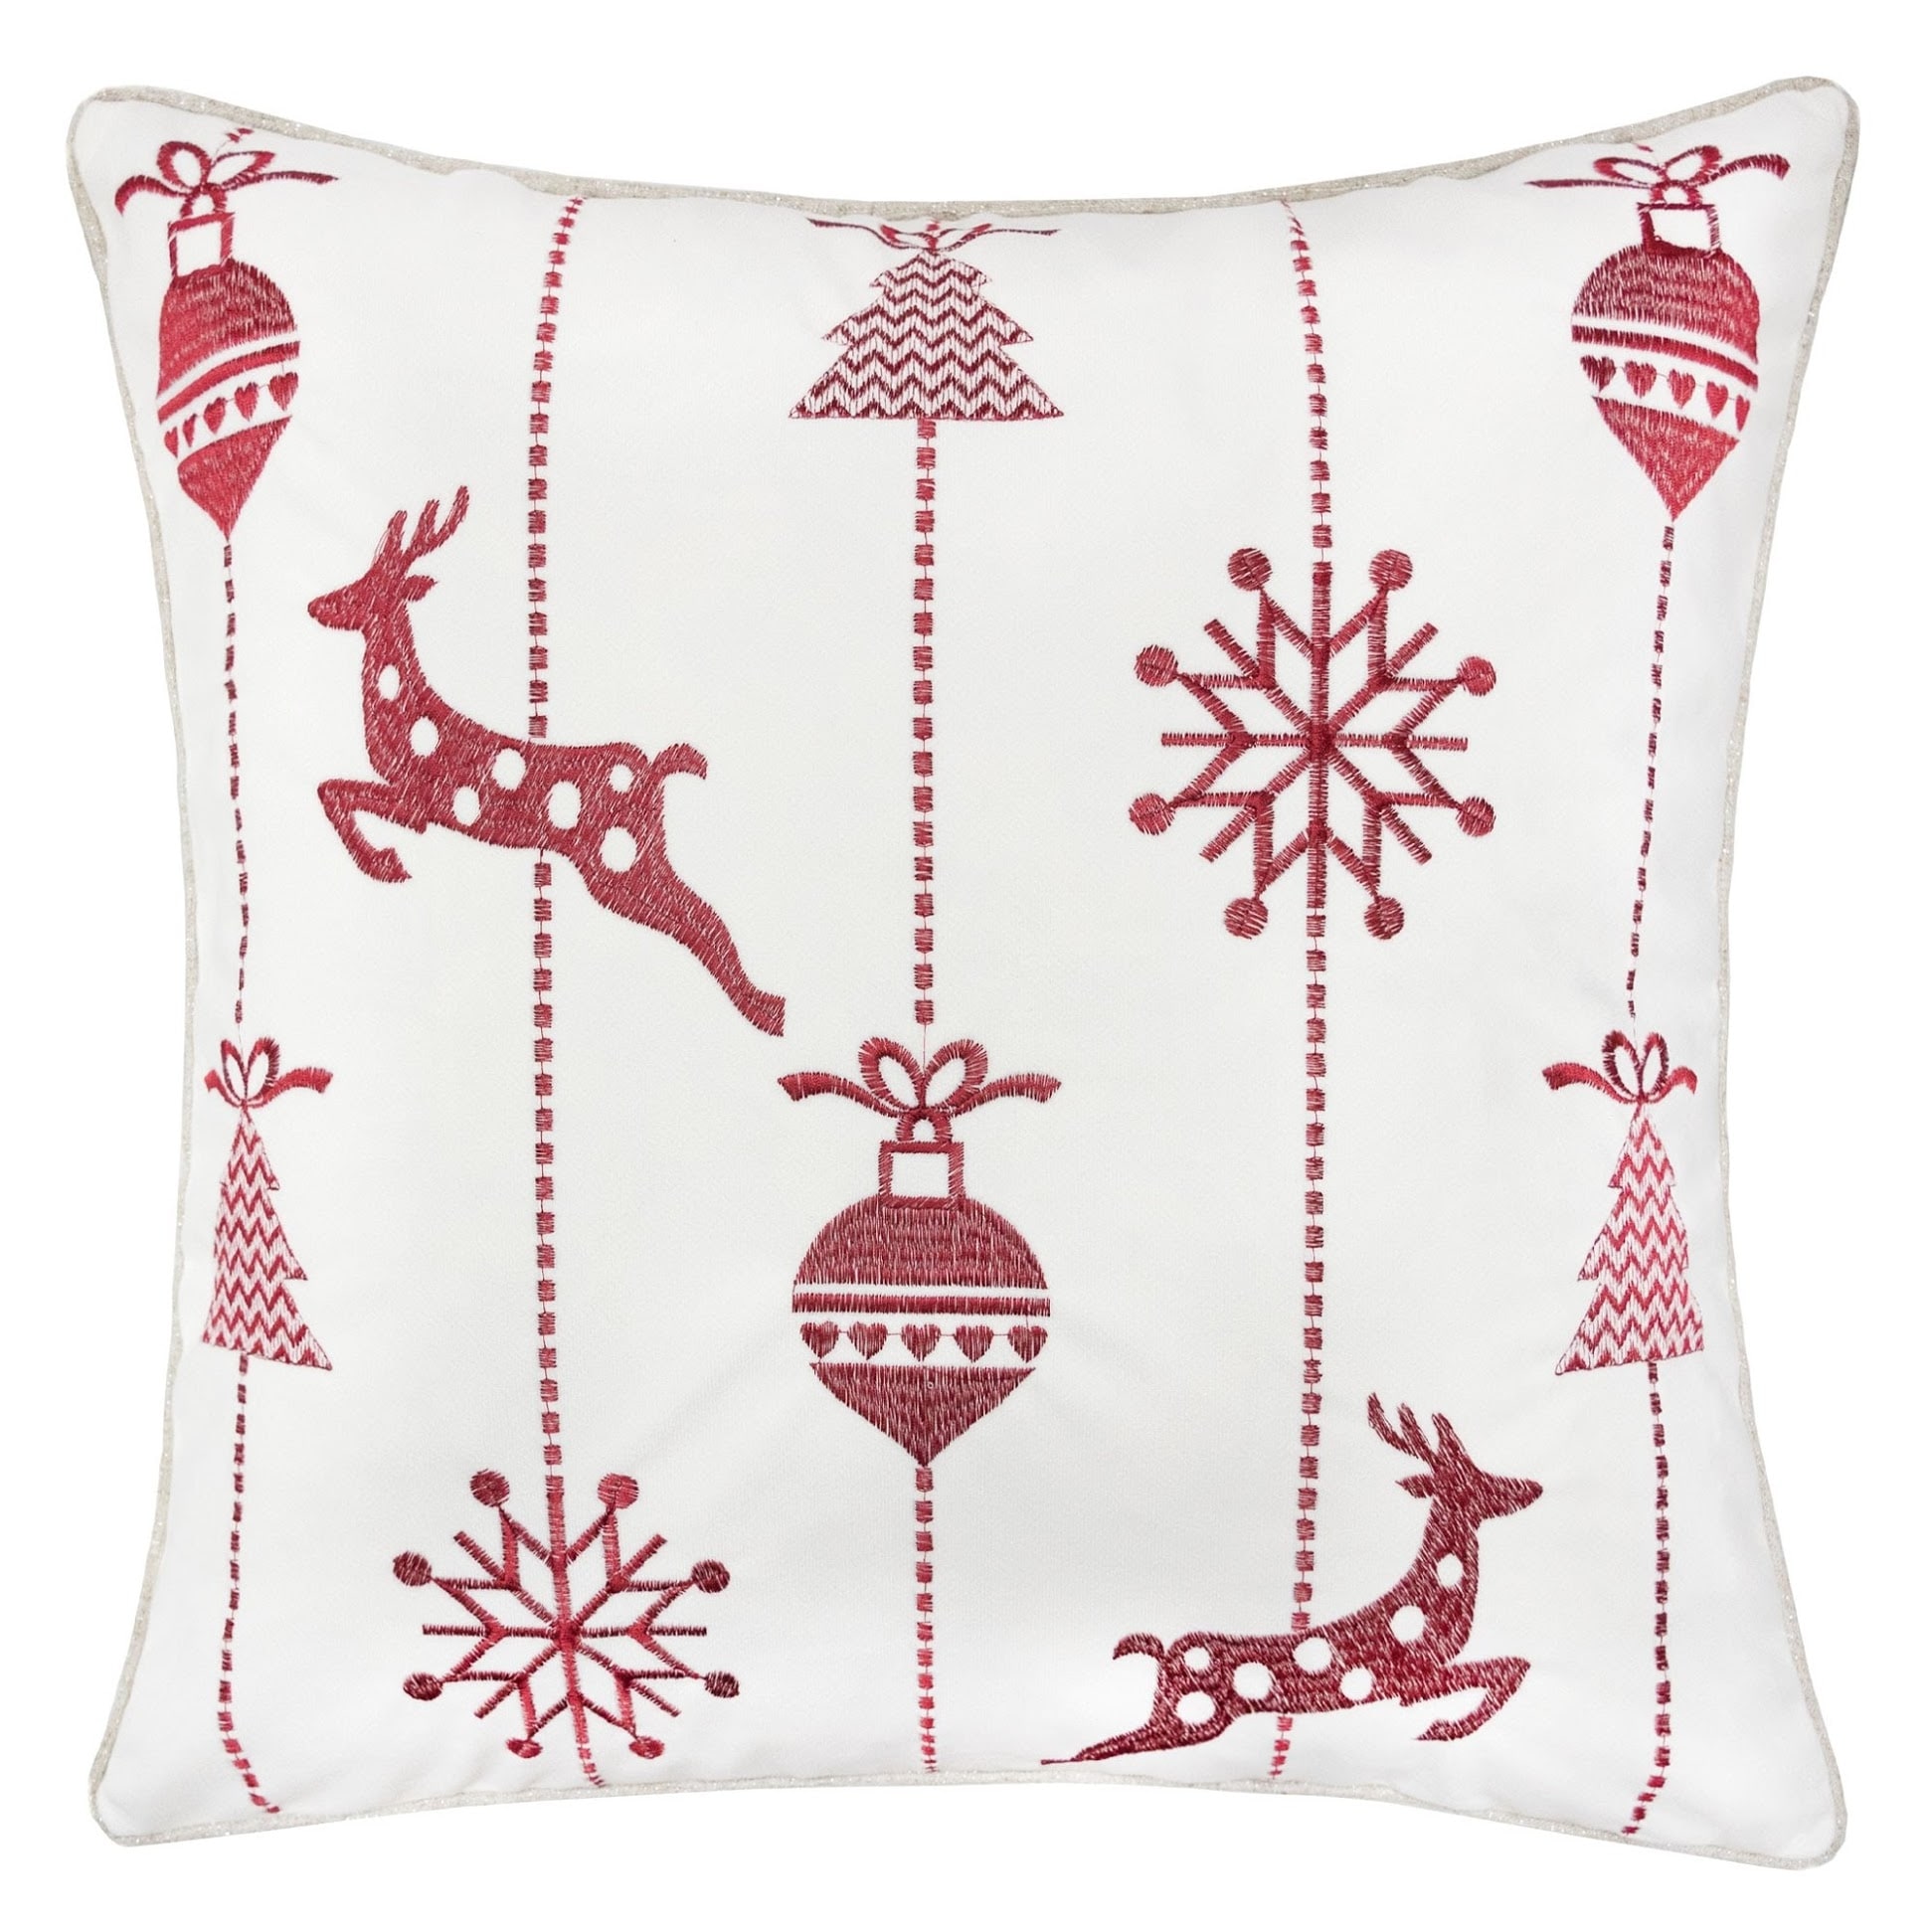 https://ak1.ostkcdn.com/images/products/is/images/direct/f943da6342483ecacc843206ef433f0cef1b6f8d/Homey-Cozy-Embroidery-Christmas-Throw-Pillow-Cover-%26-Insert.jpg